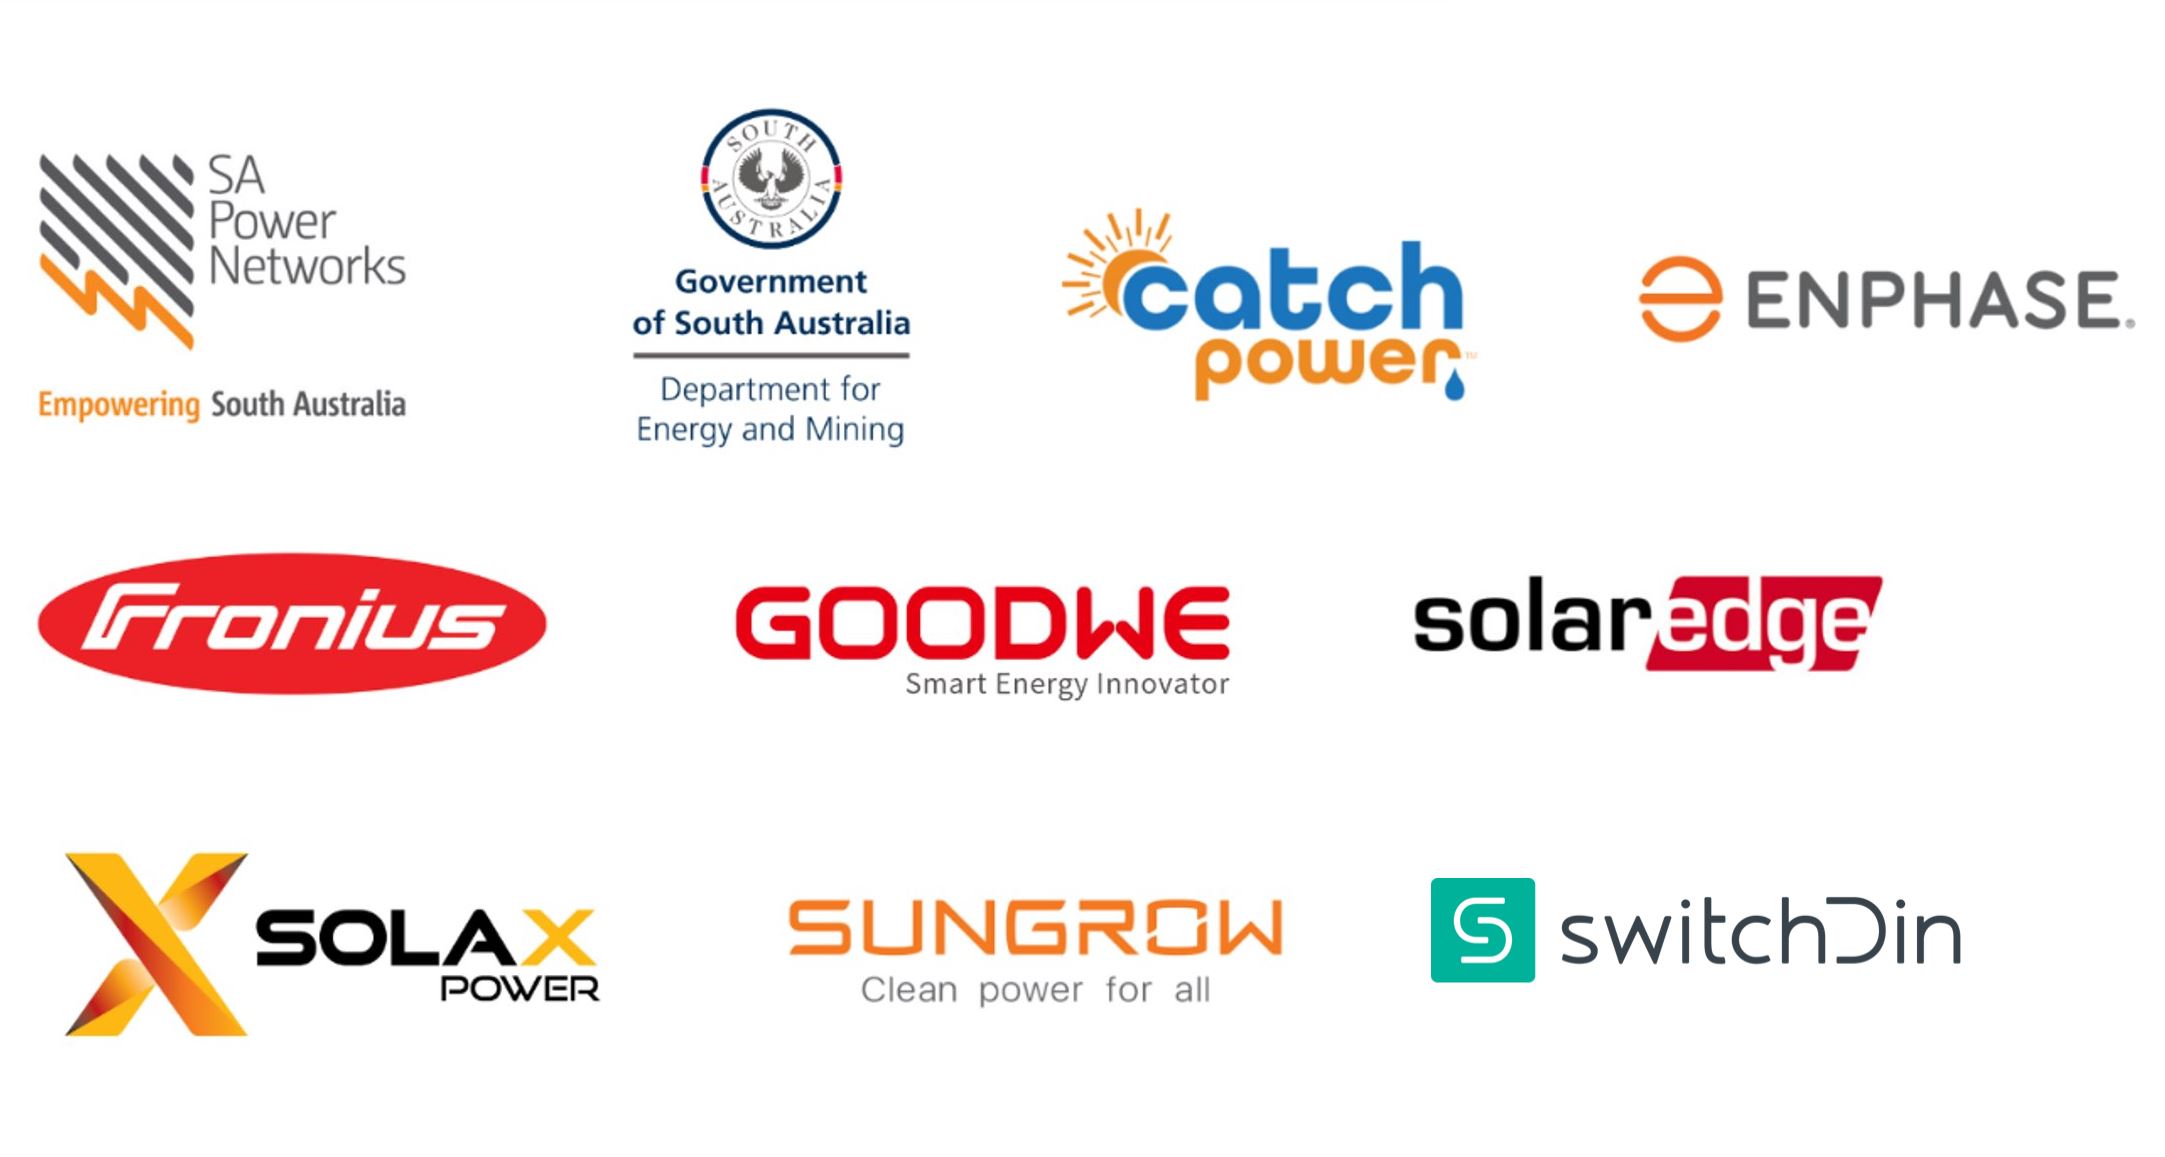 Dynamic exports for installers, partner logos including SA Power Networks, Government of South Australia Department for Energy and Mining, Catch Power, Enphase, Fronius, Goodwe, Solar Edge, Solax, Sungrow and Switchdin